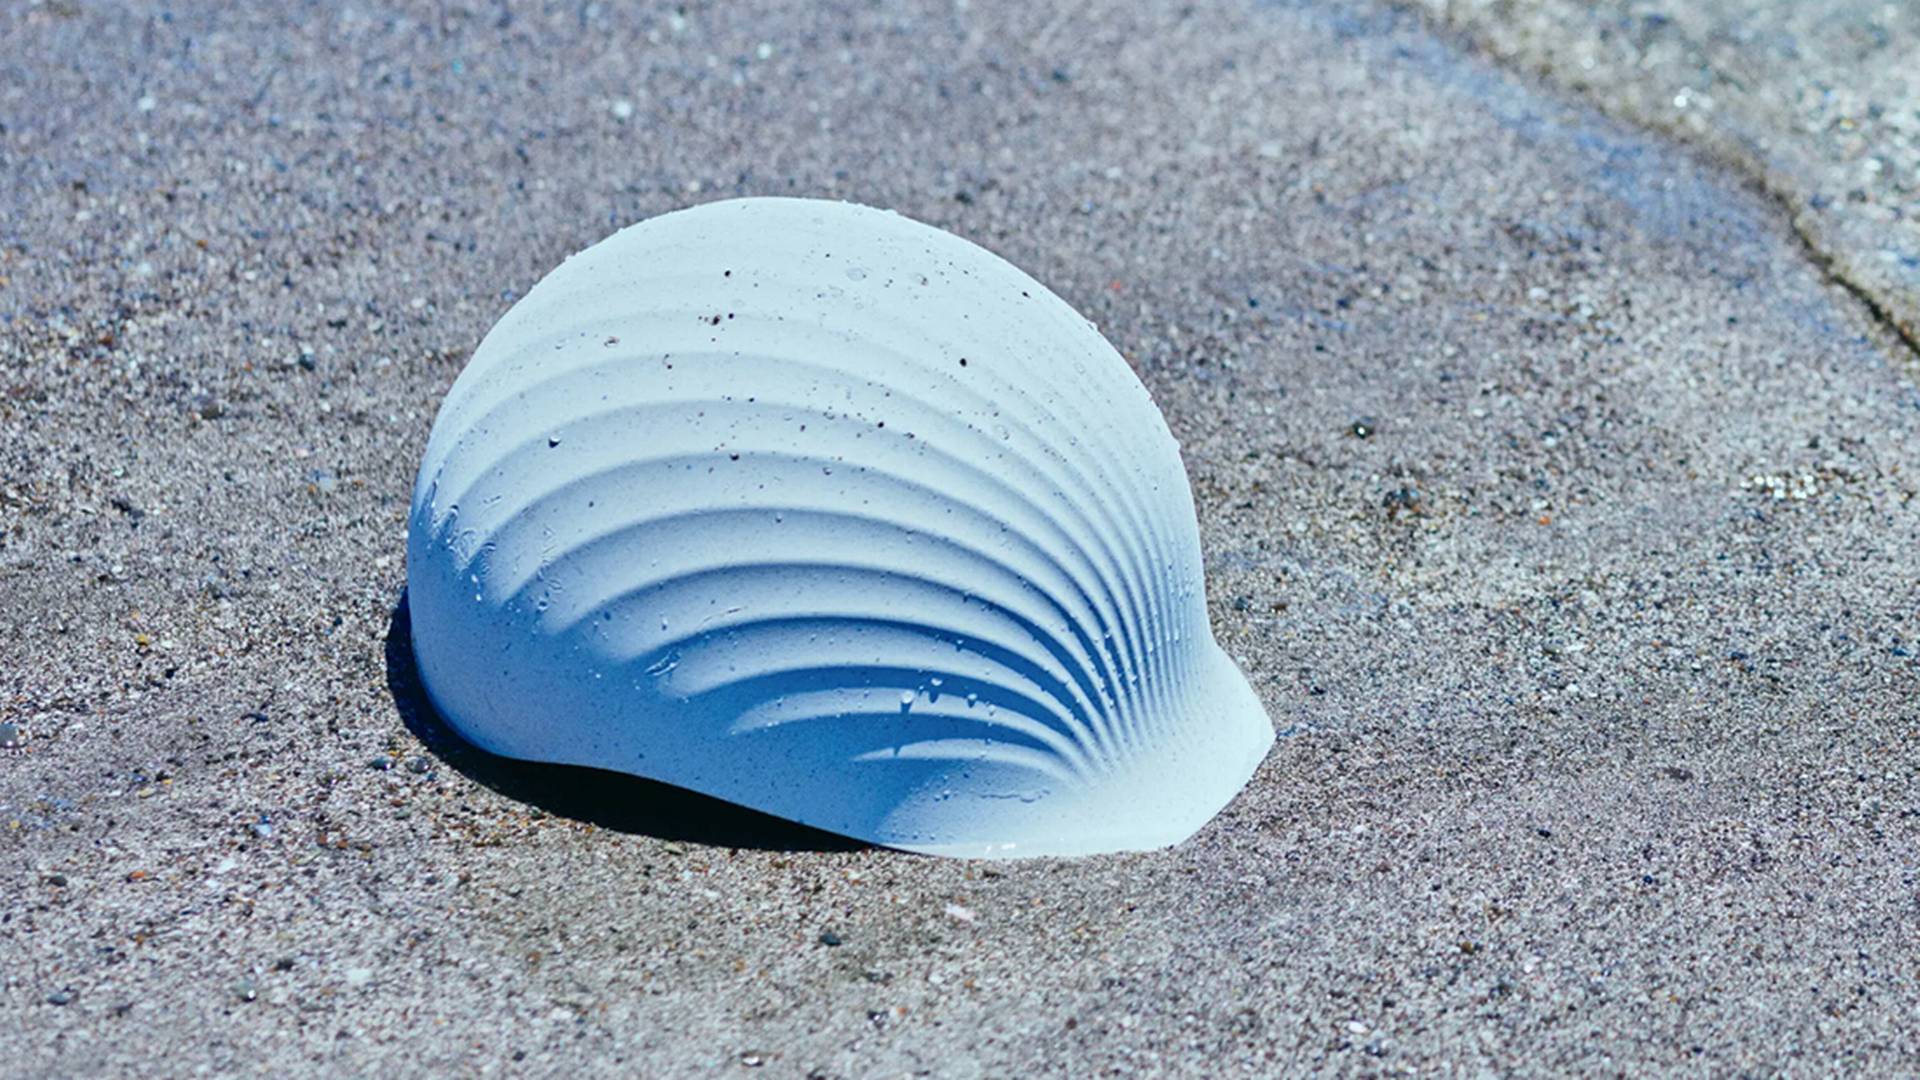 Here is the “shellmet” – a durable shell helmet